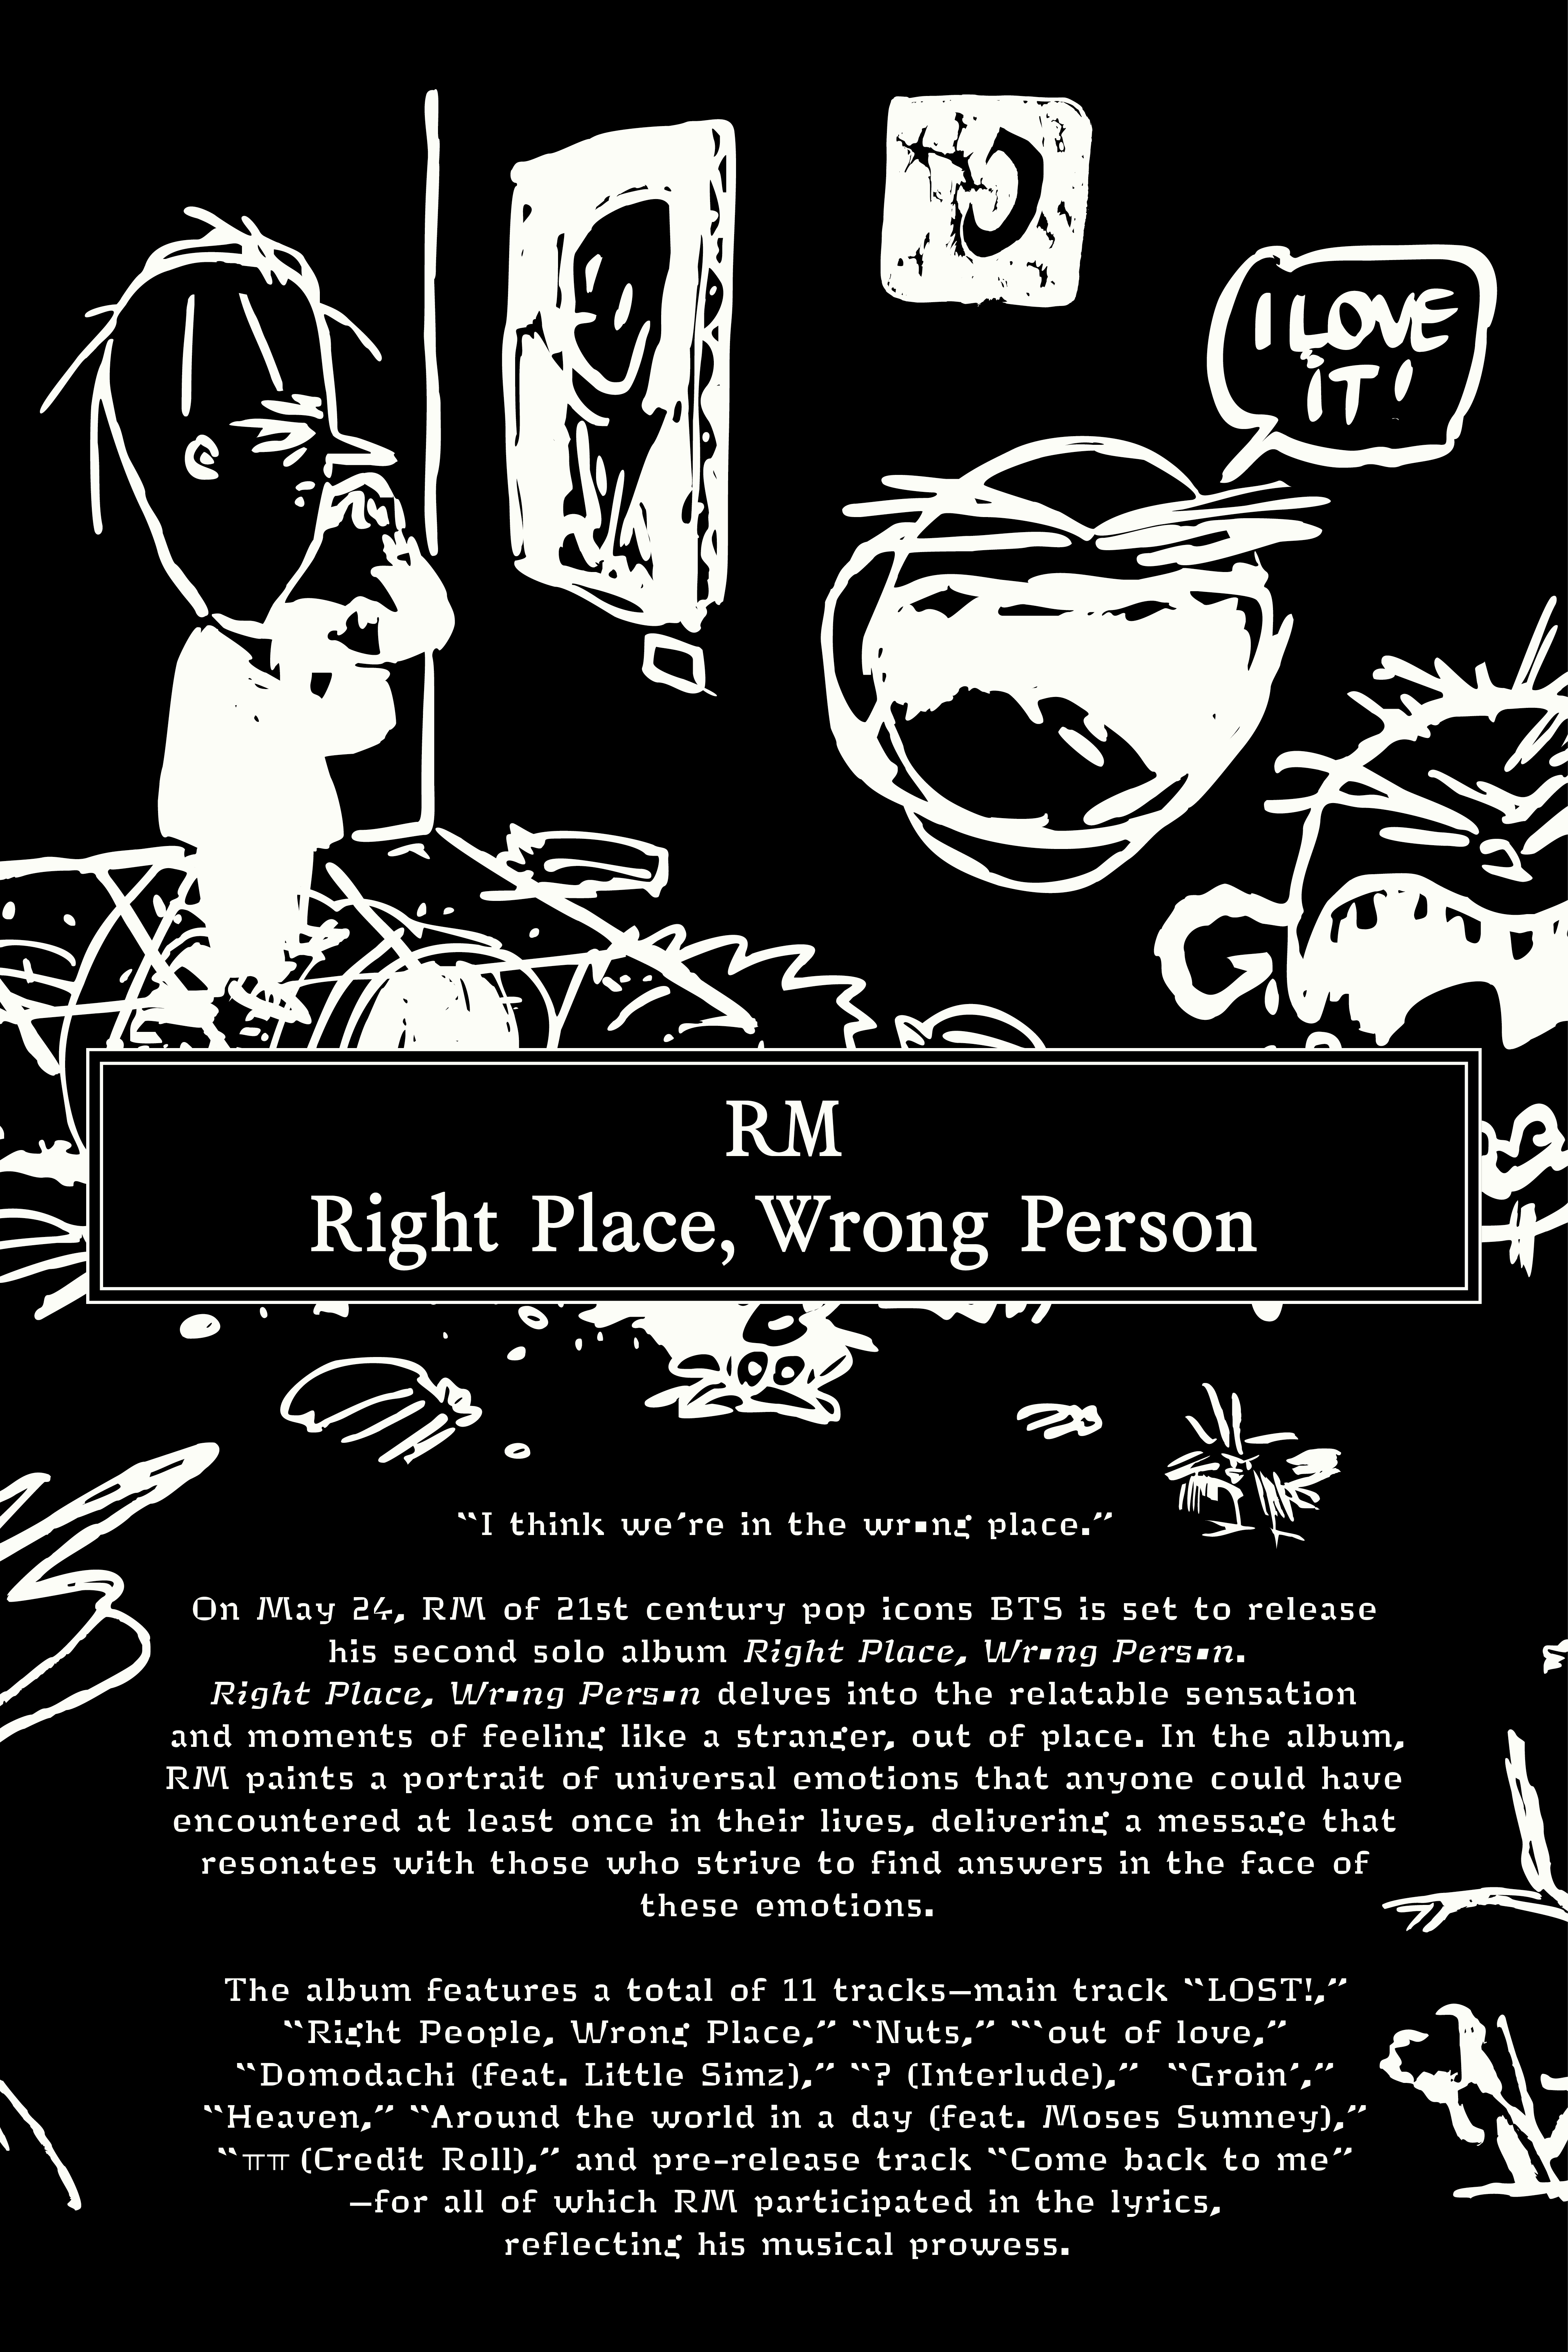 RM, Right Place, Wrong Person